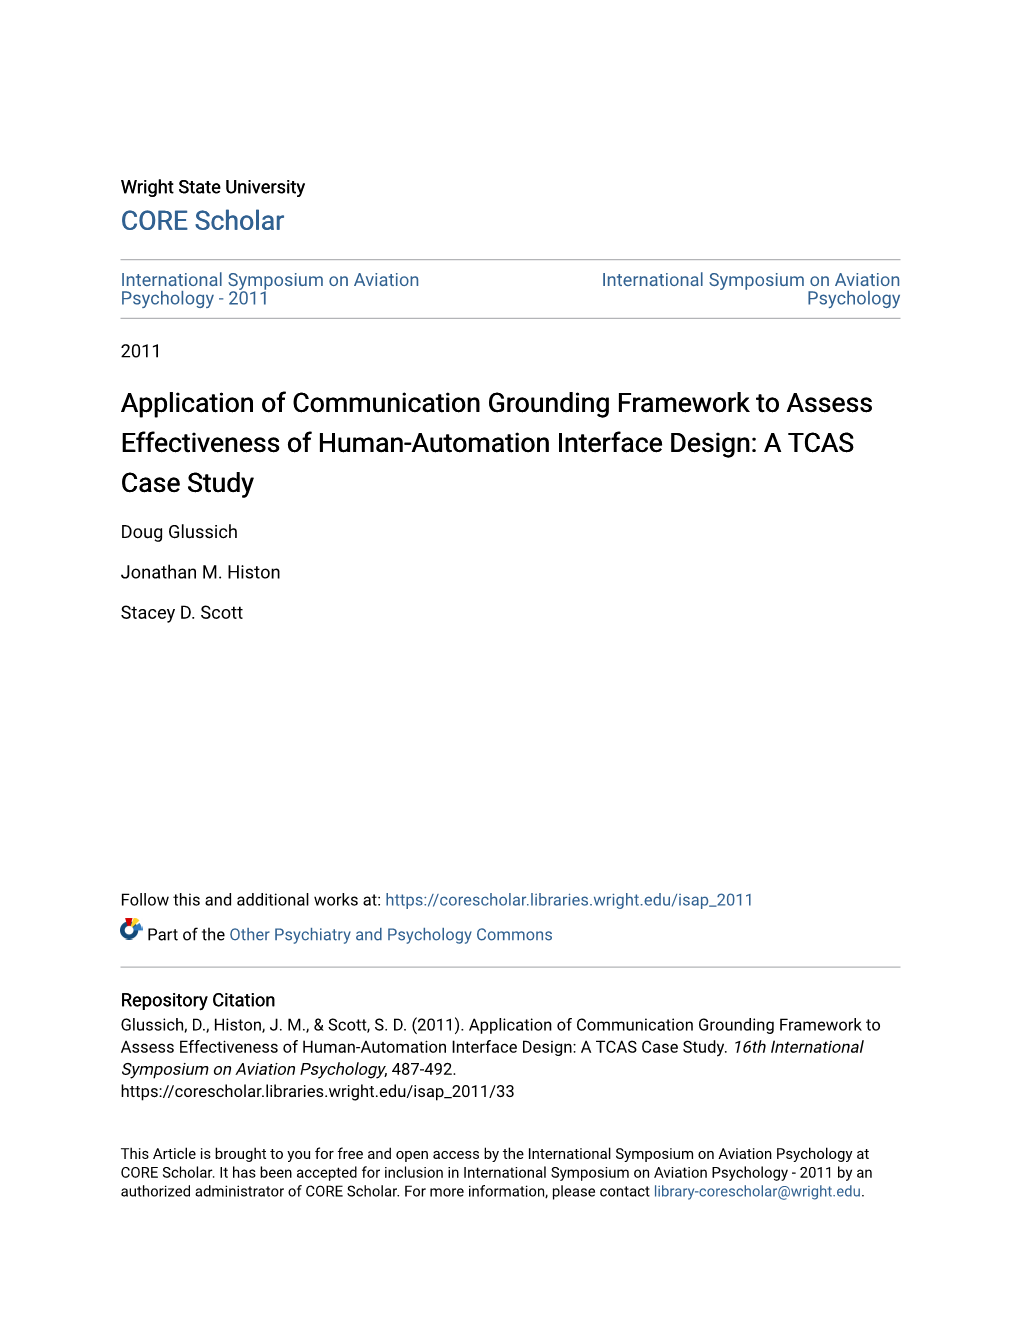 Application of Communication Grounding Framework to Assess Effectiveness of Human-Automation Interface Design: a TCAS Case Study